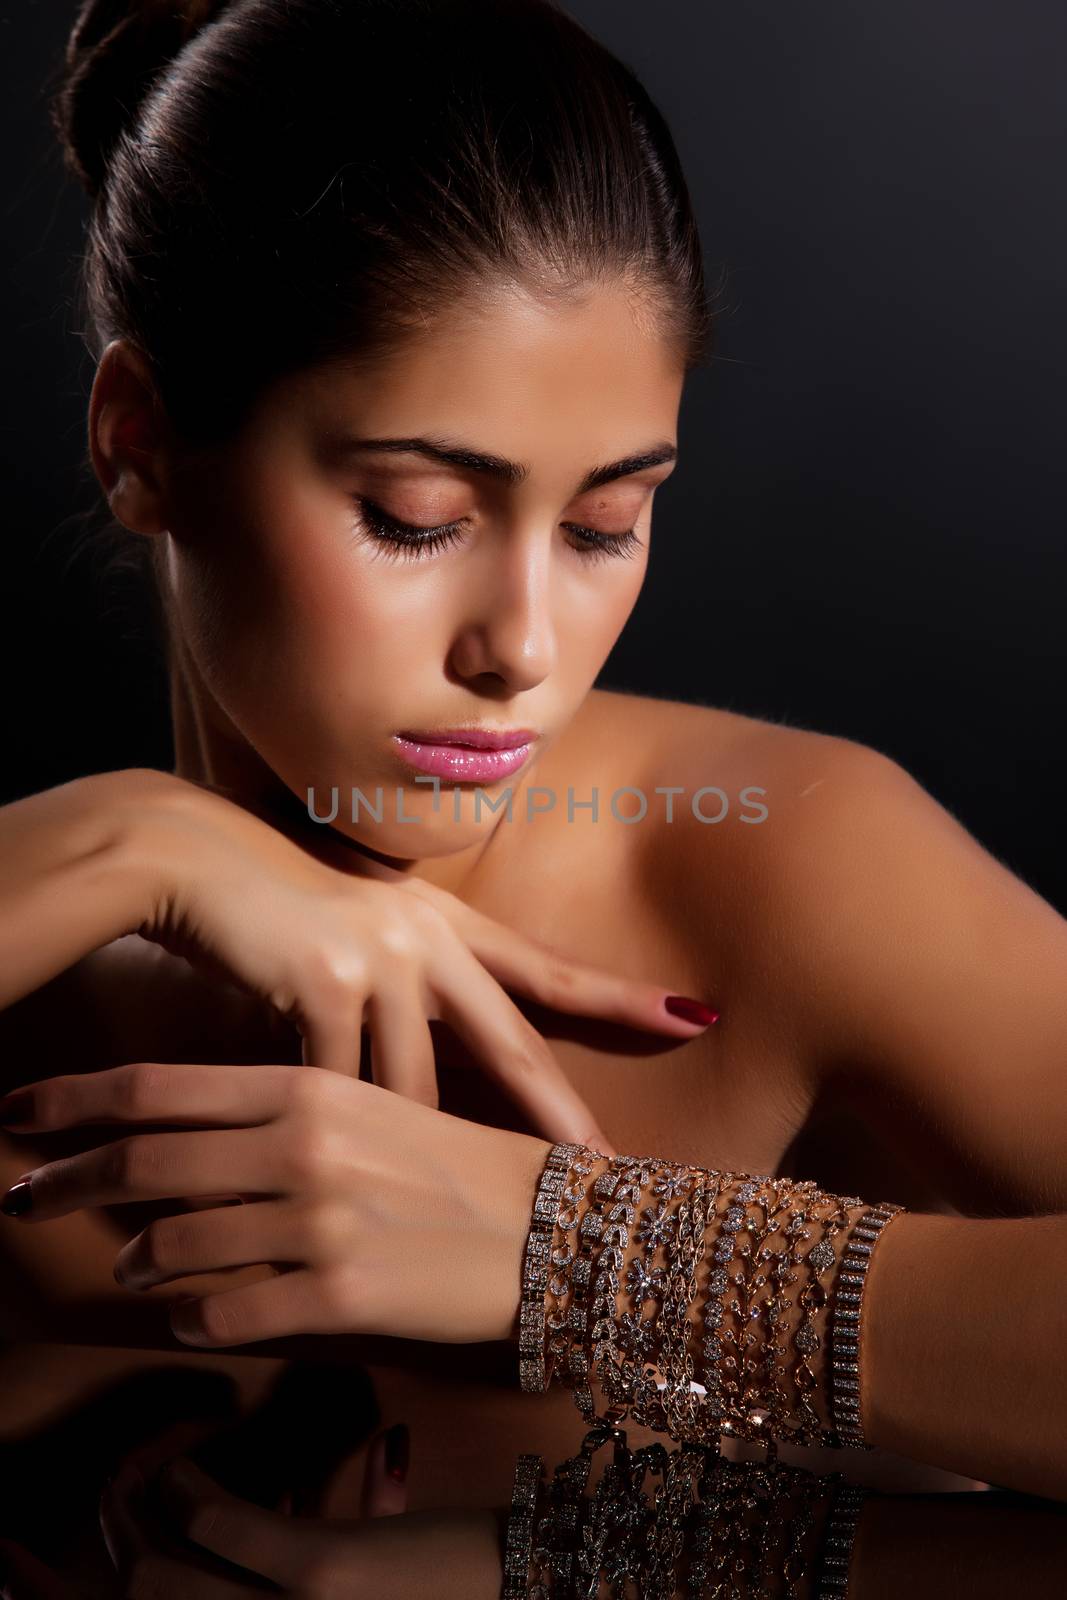 Young beautiful woman with bracelets on her hand